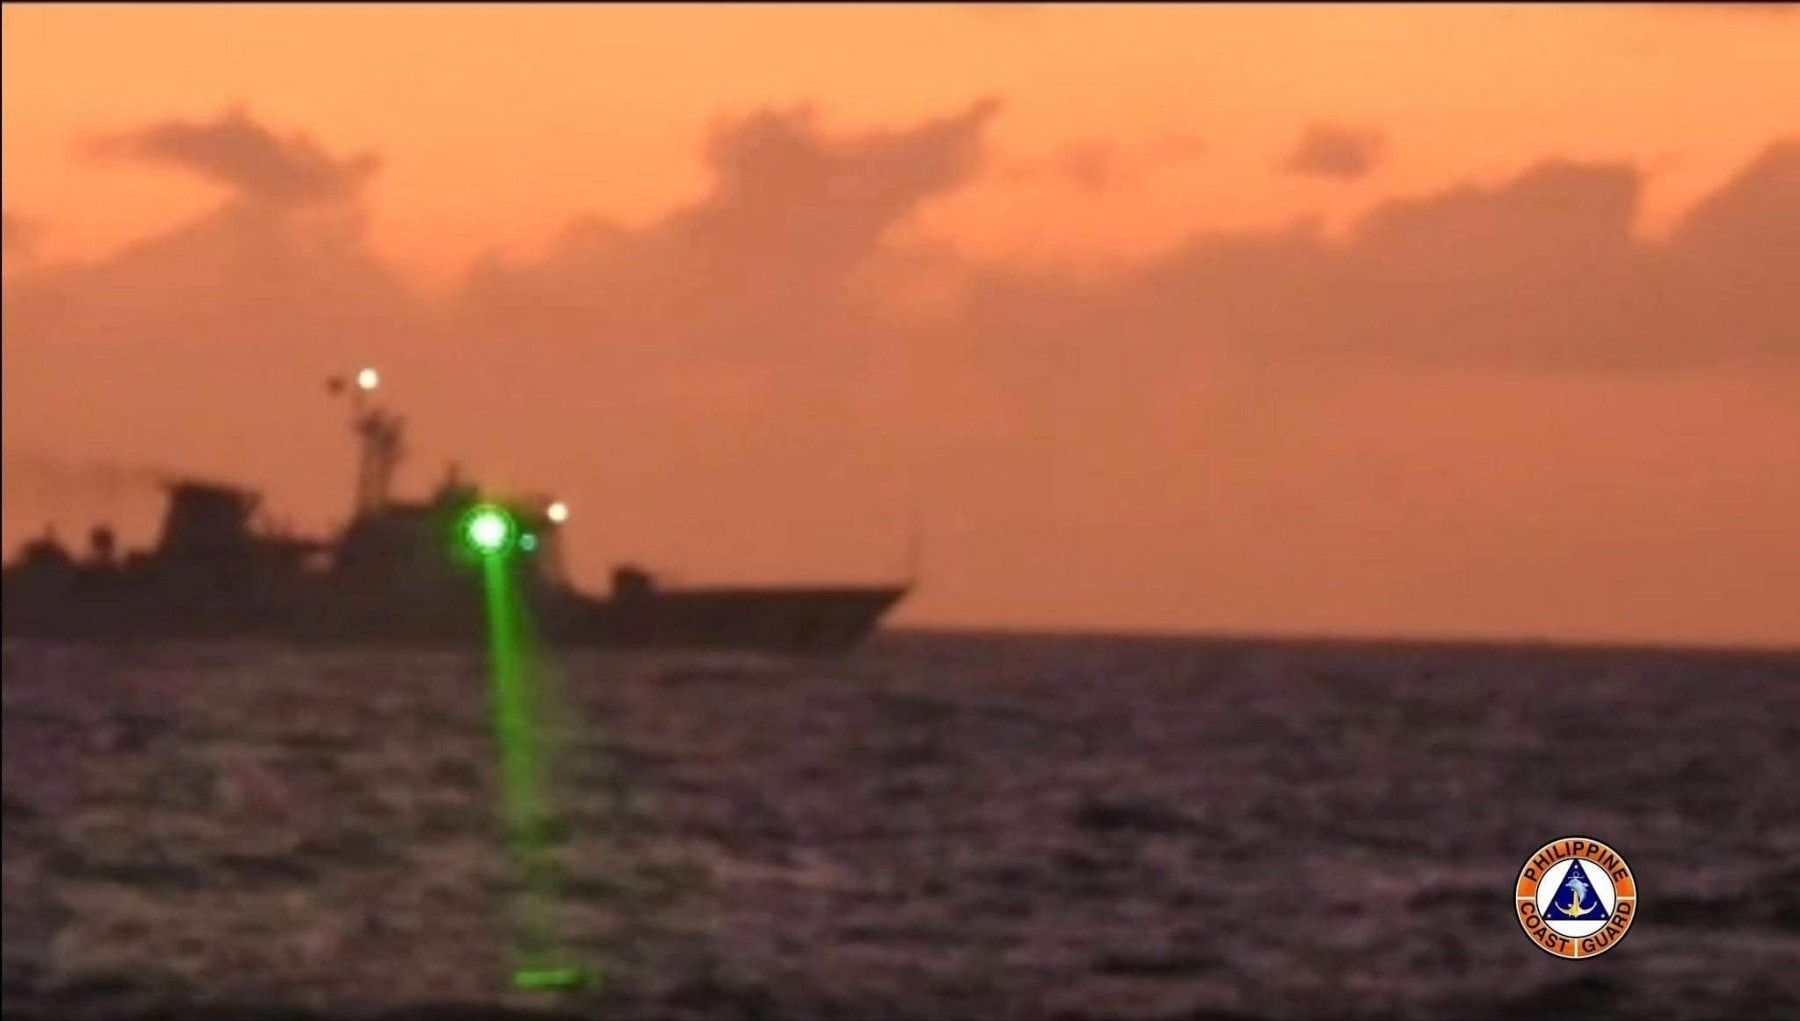 Chinese Coast Guard aims laser at PCG vessel on resupply mission